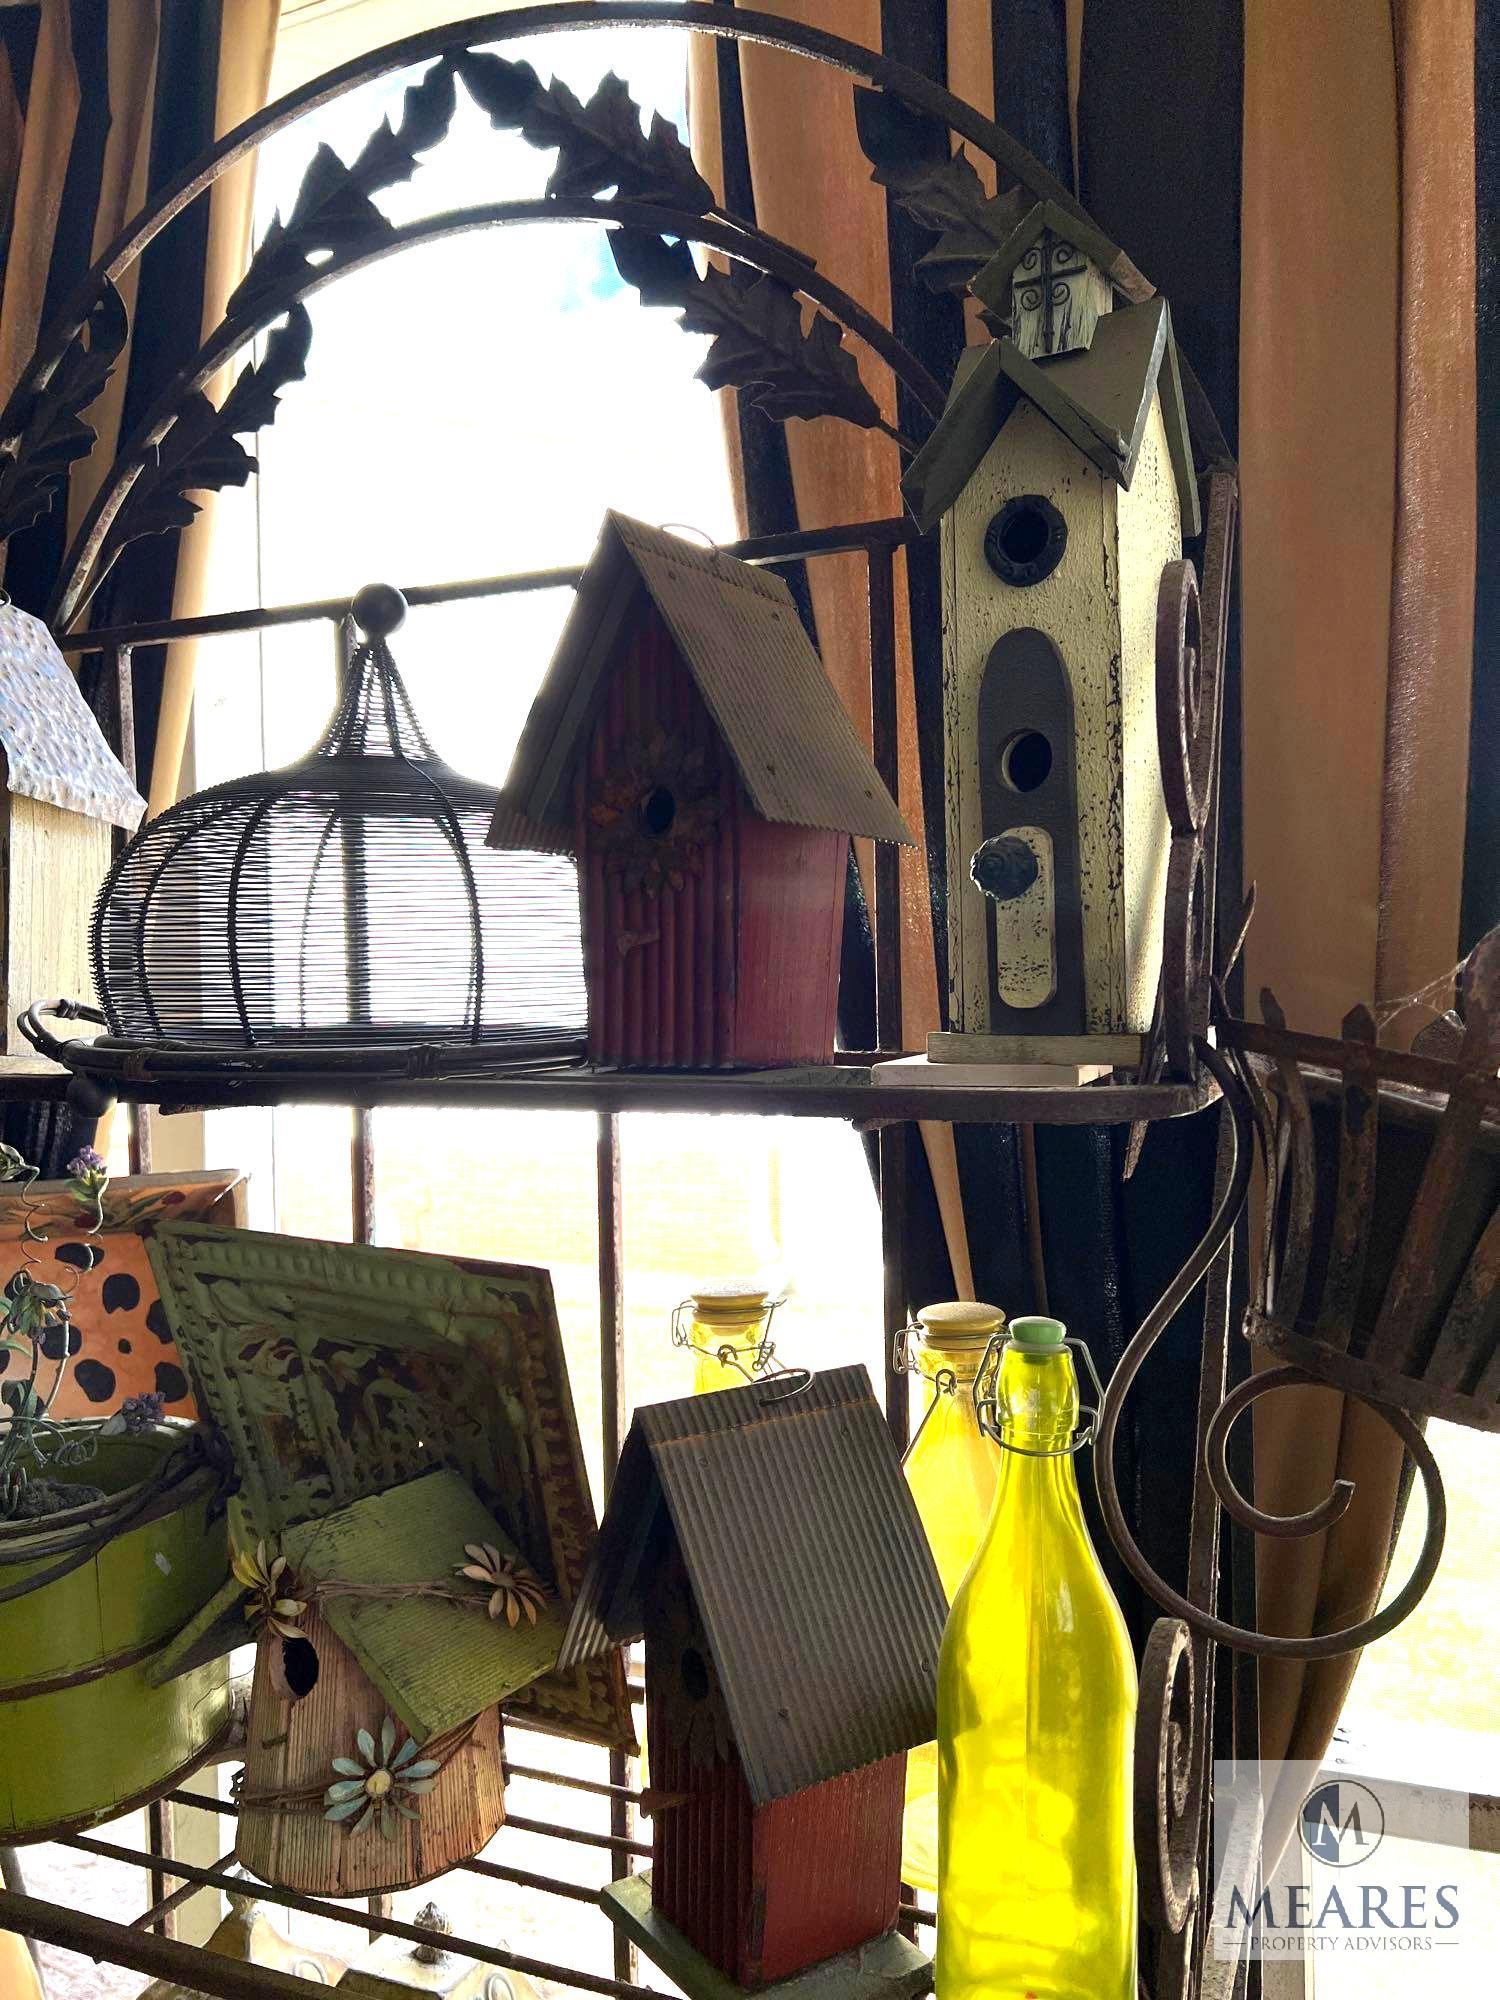 Metal Bakers Rack with Birdhouses, Watering Cans and Etc.